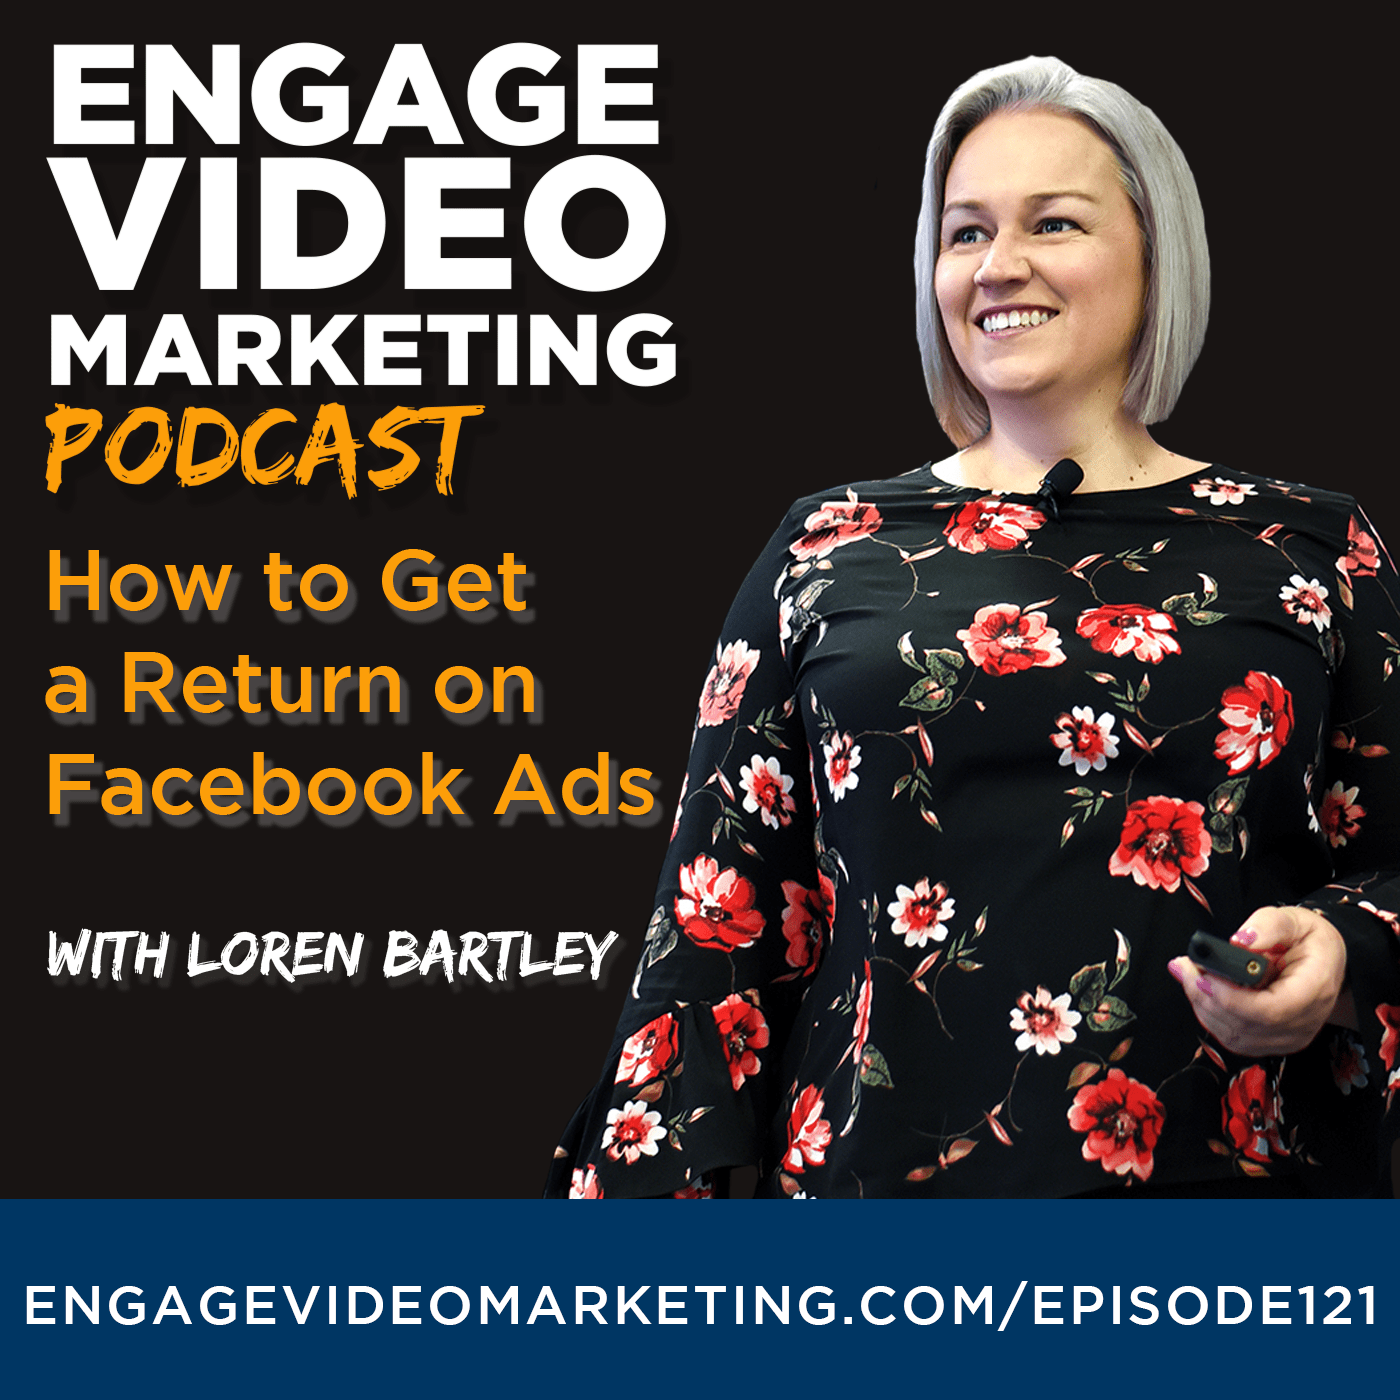 How to Get A Return on Facebook Ads with Loren Bartley